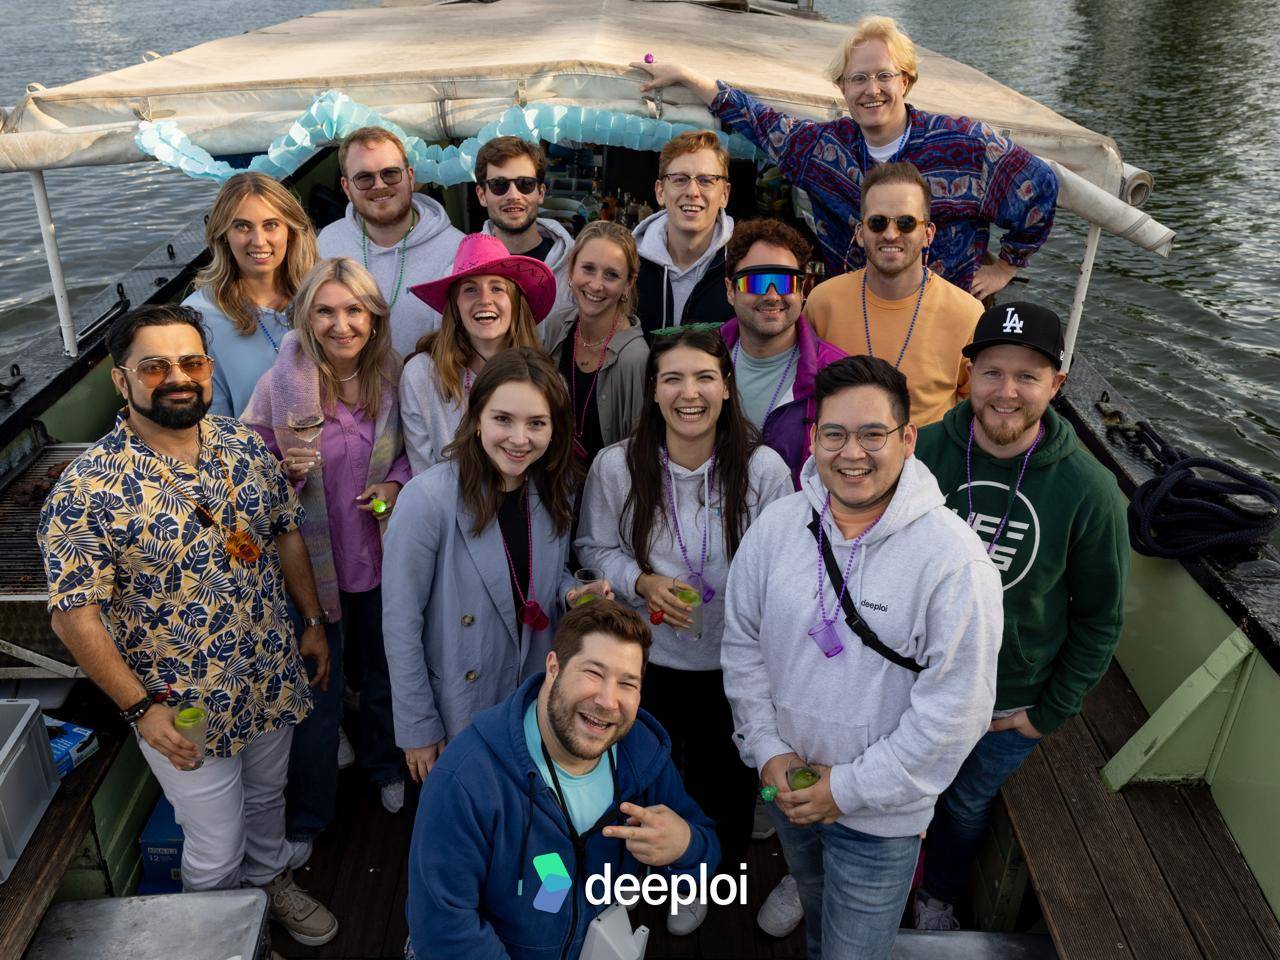 Meet deeploi, managing IT the right way, with no hassle and no problems